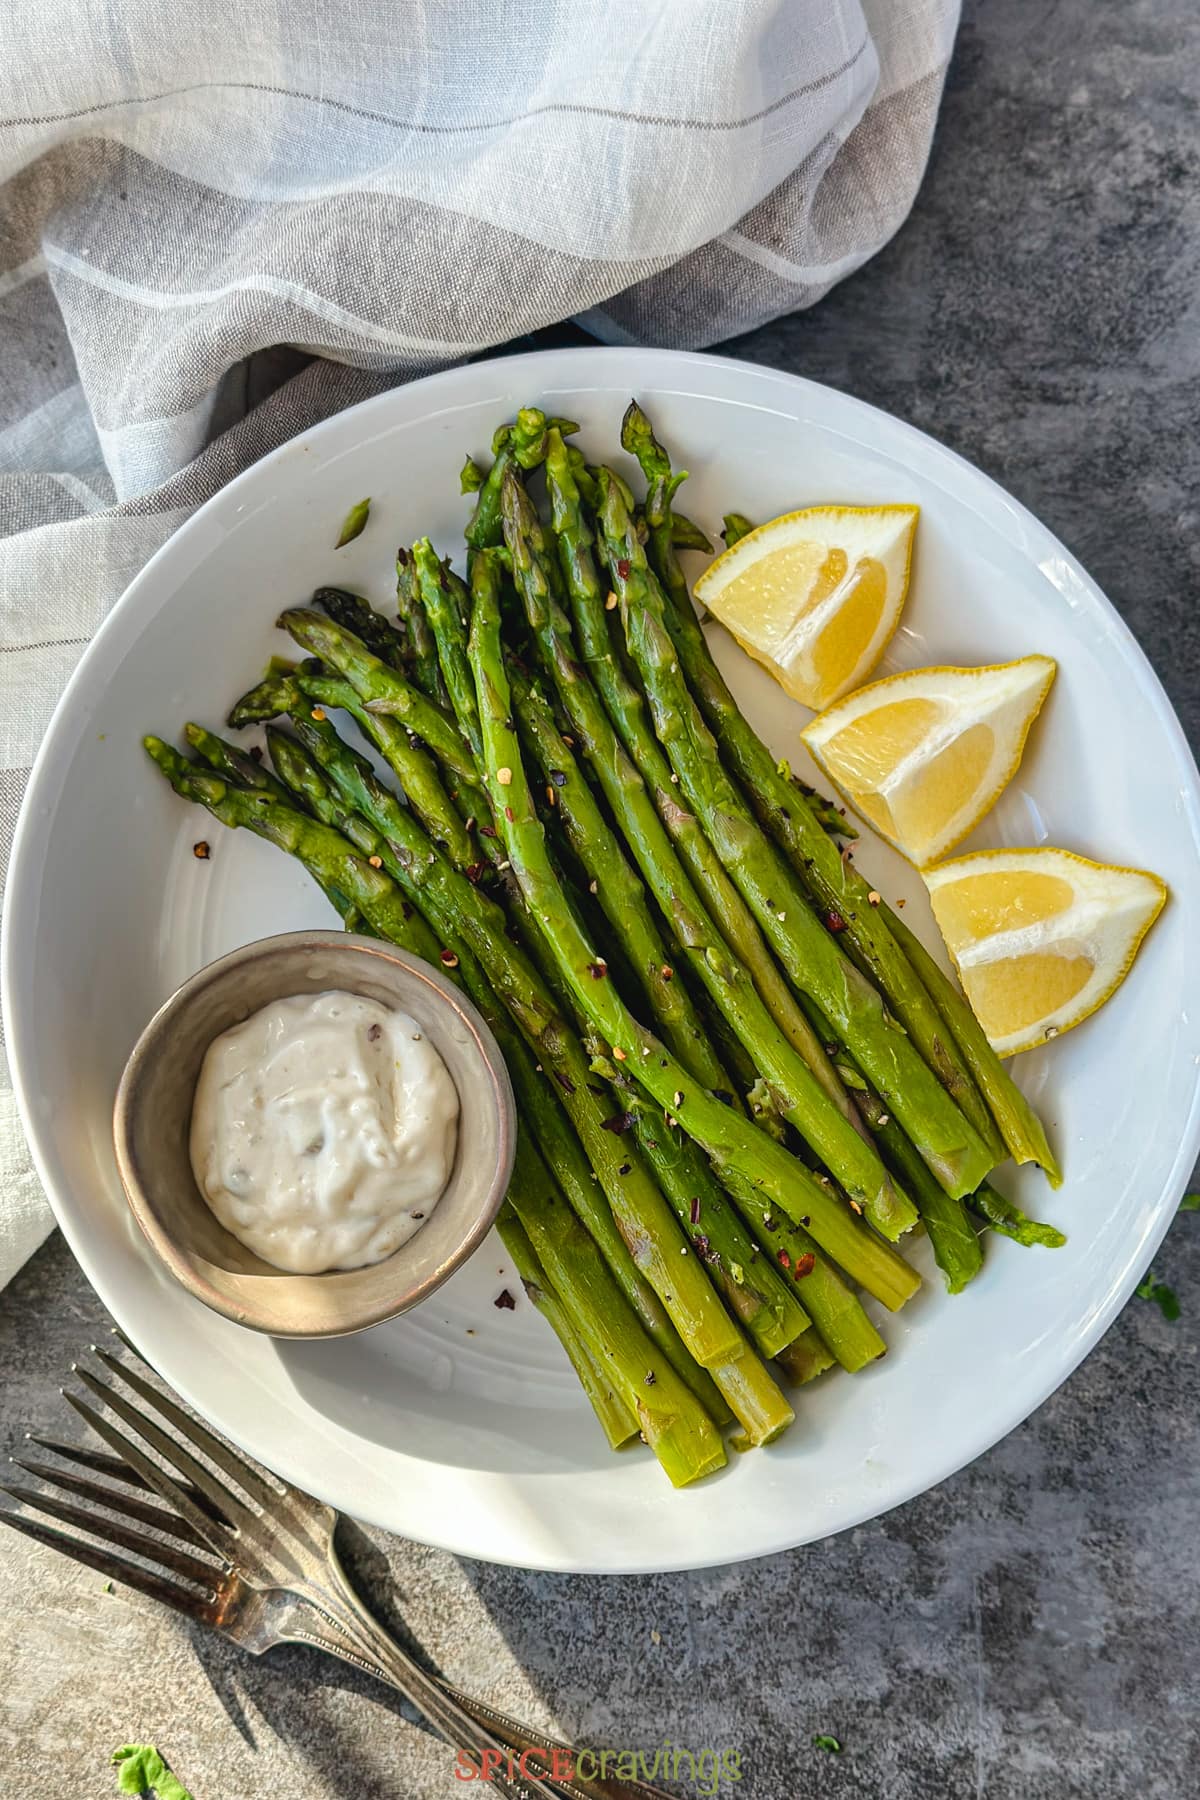 instant pot asparagus spears with lemon wedges and dipping sauce on white plate